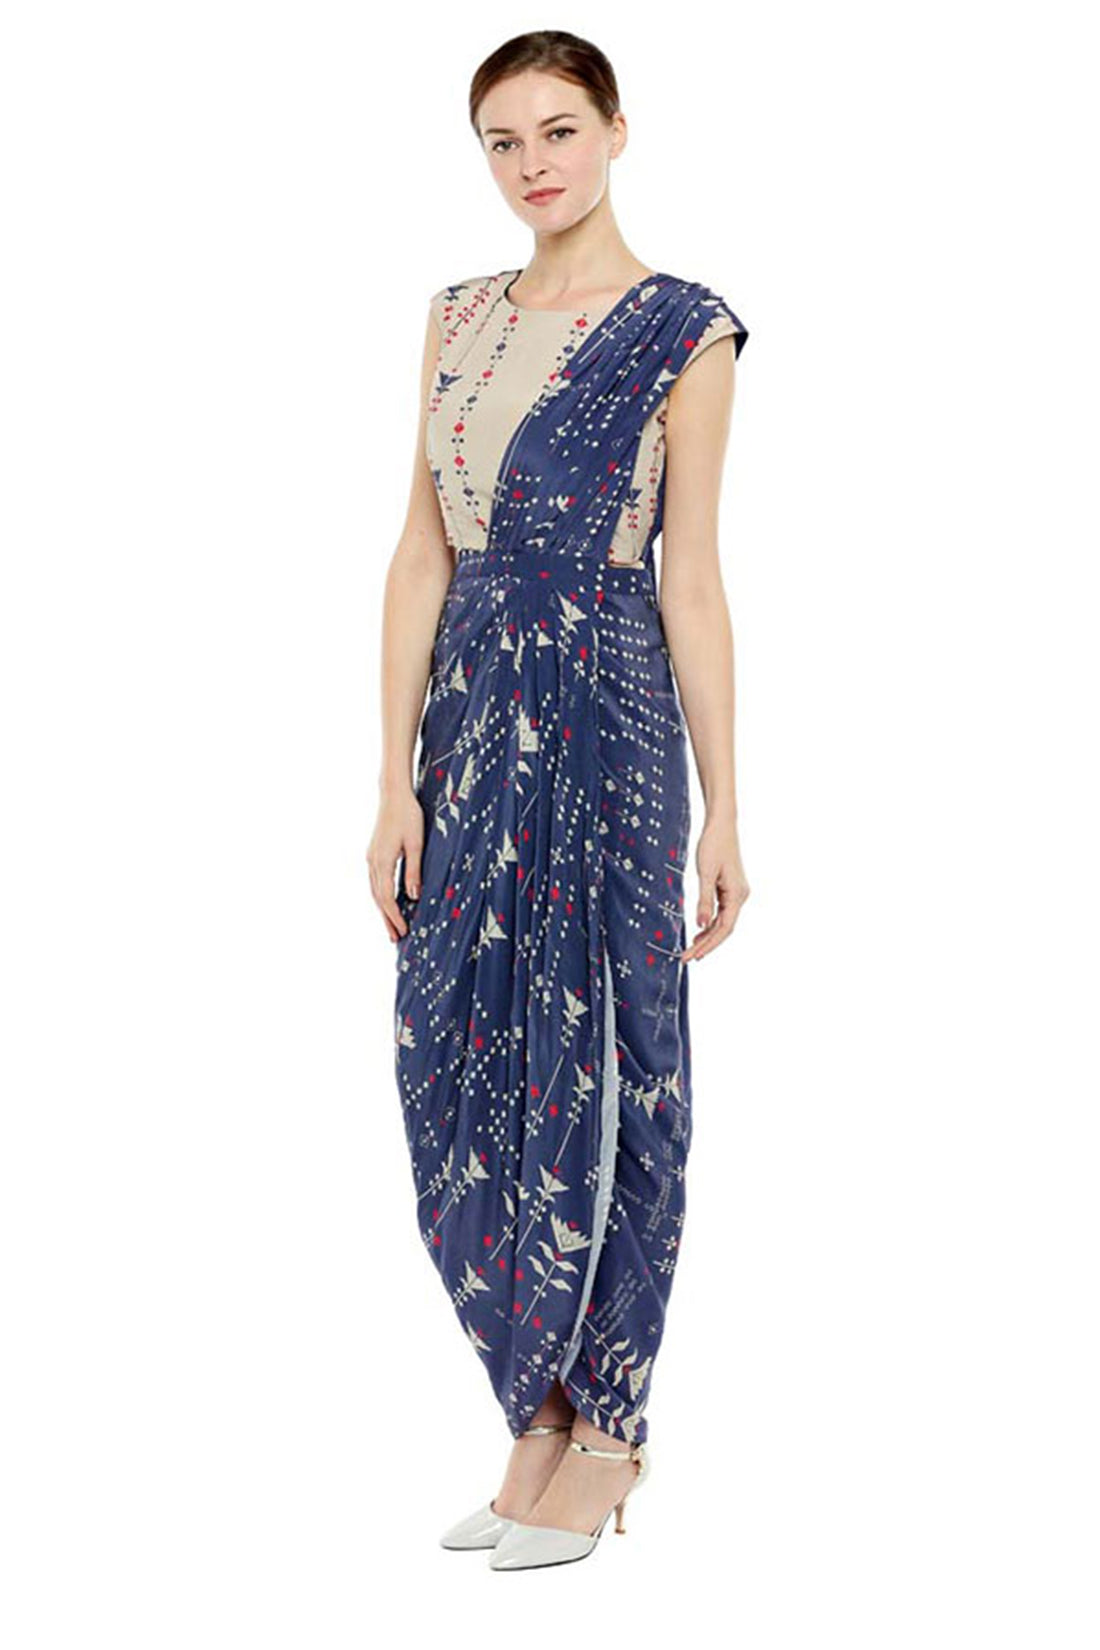 Azulejos Printed Pre-Stitched Saree With Top